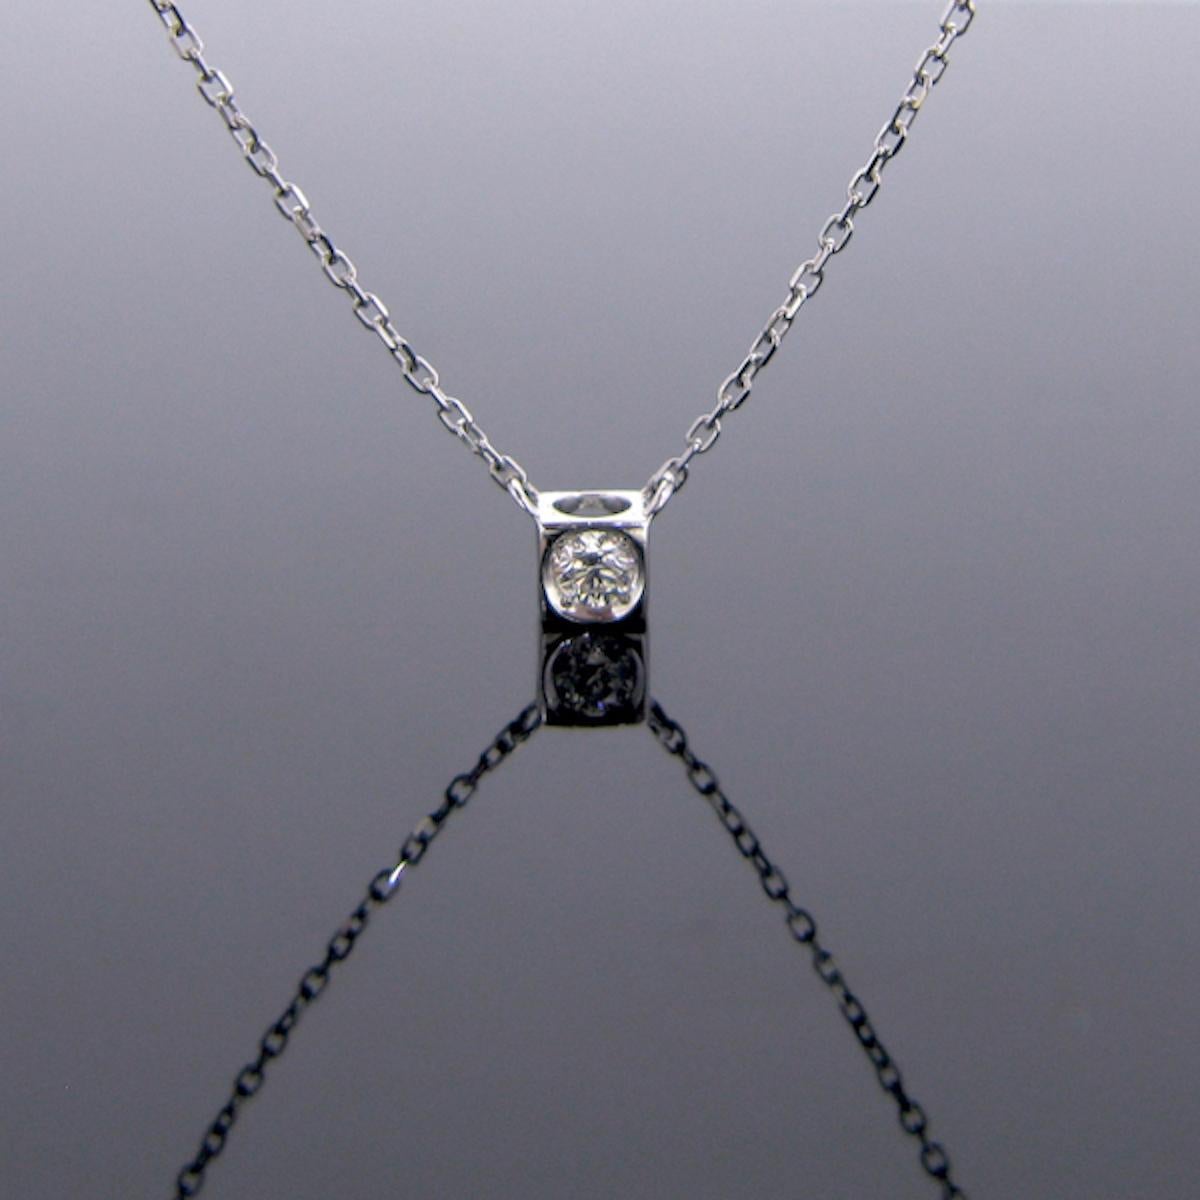 A refined Diamond pendant necklace by DINH VAN. This lovely pendant is set with a brilliant cut diamond weighing around 0.15ct. It is closed set on an airy cube.It is perfect to wear every day. It was made by the French jewelry brand DINH VAN. The